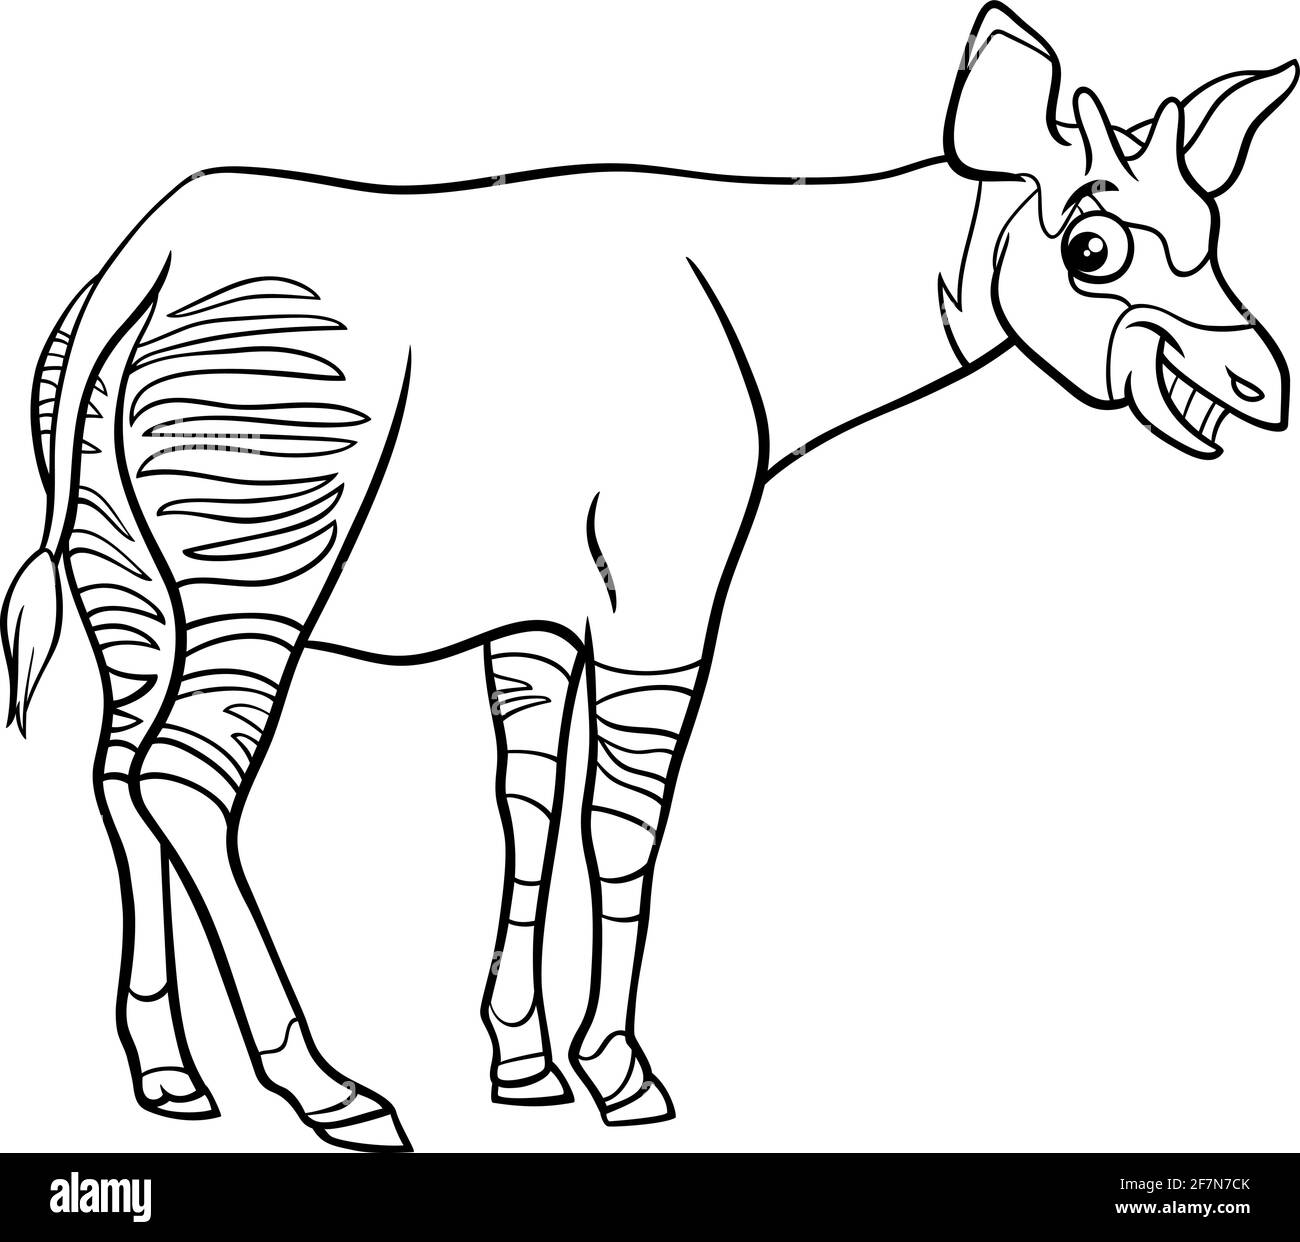 Black and white cartoon illustration of funny okapi comic animal character coloring book page Stock Vector